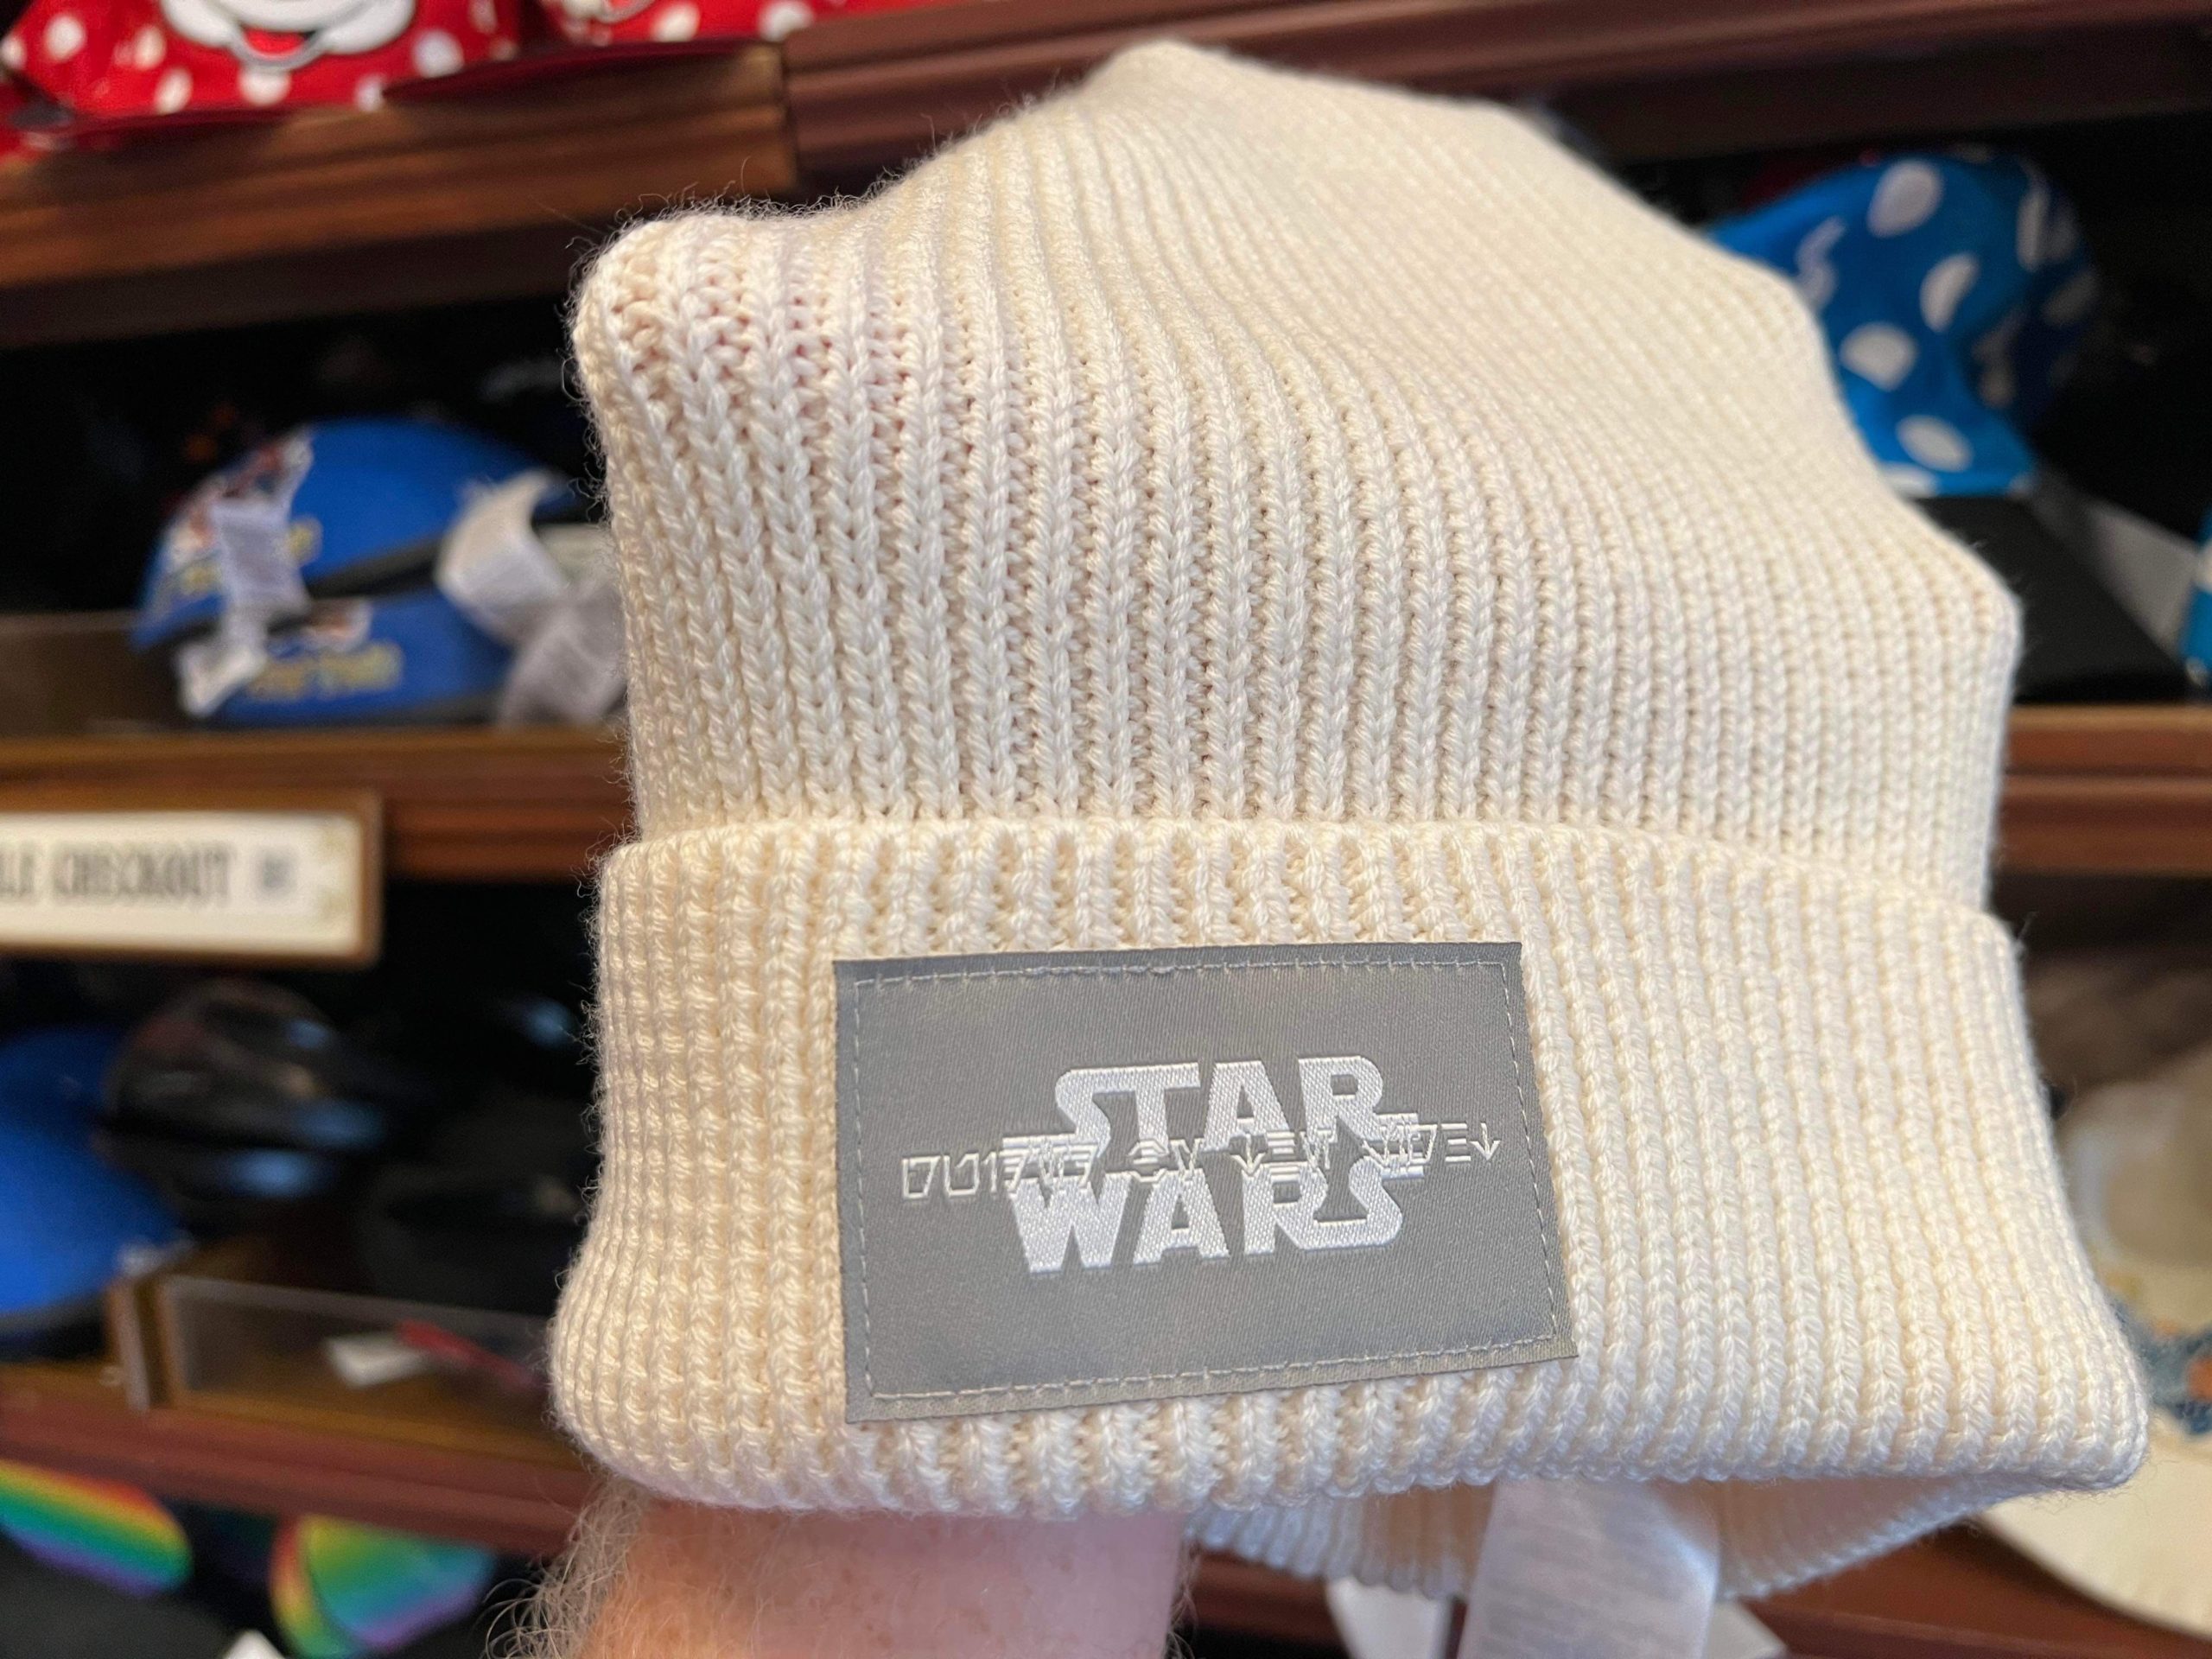 Star Wars Reflective Beanie is the Coolest New Find! - MickeyBlog.com